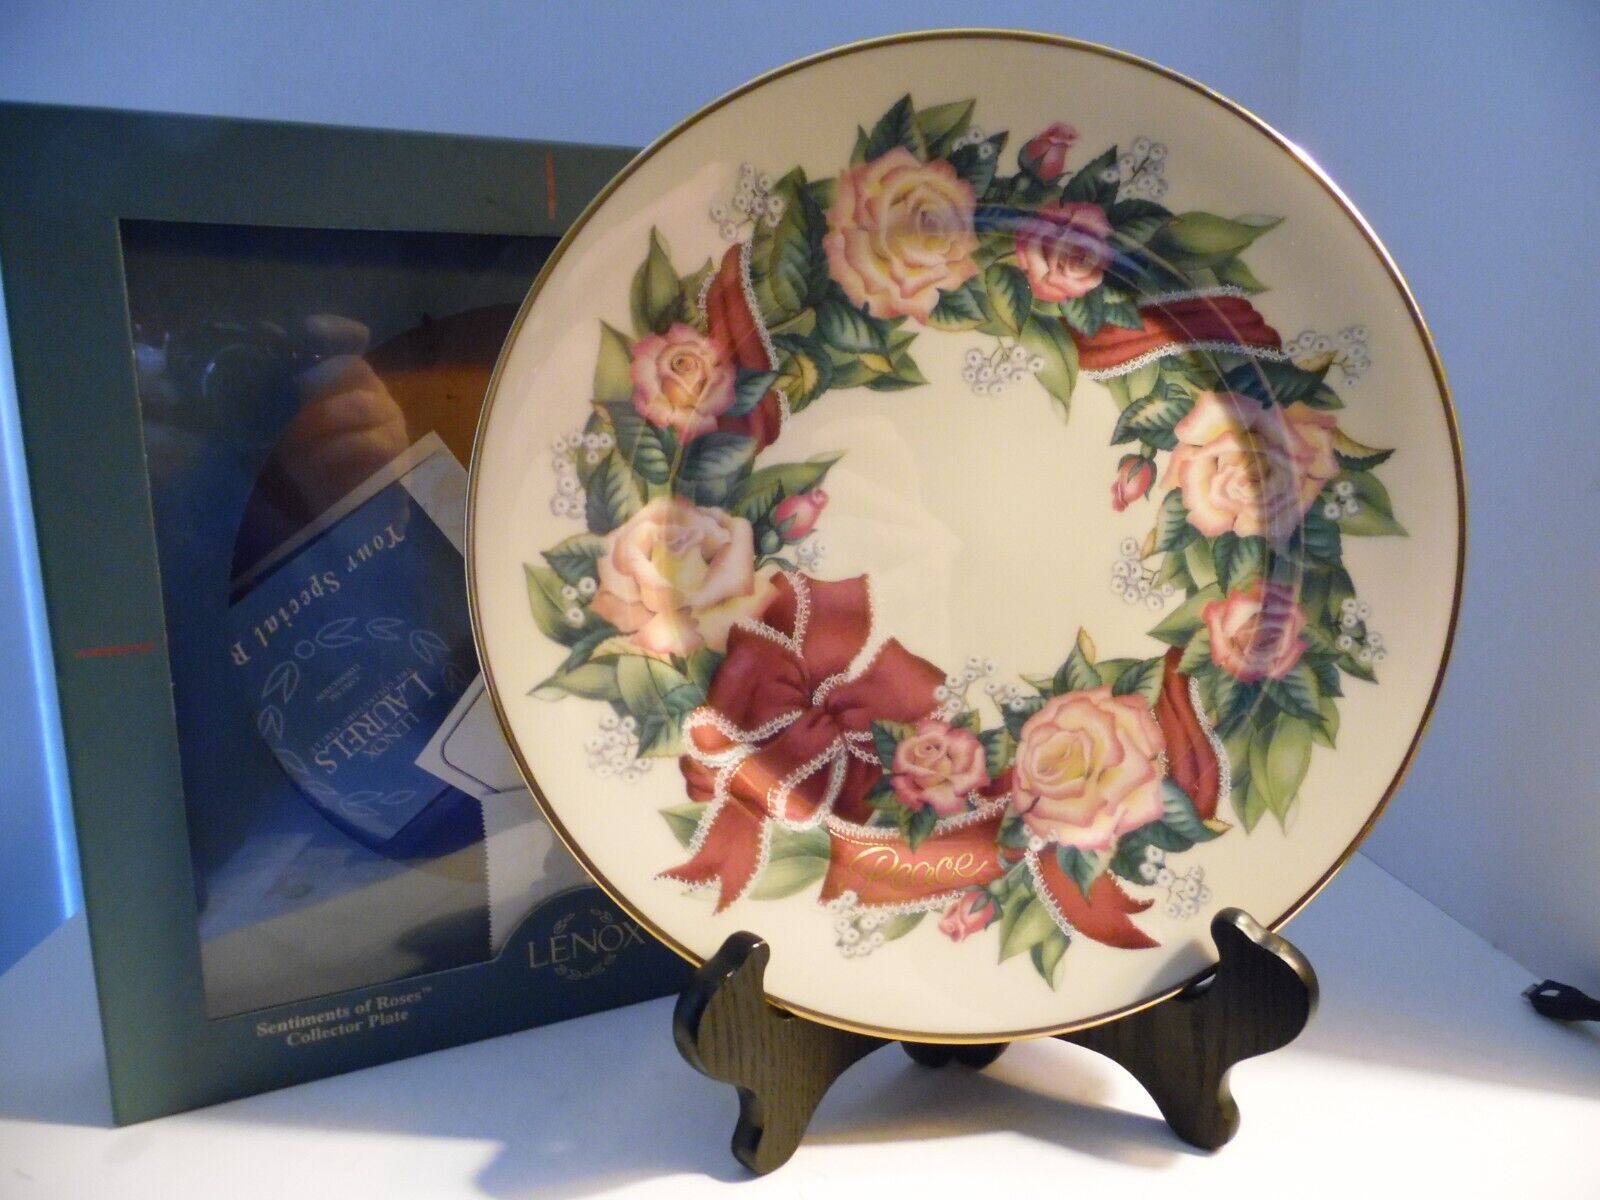 Lenox Collector Plate Sentiments Of Roses  PEACE 1996